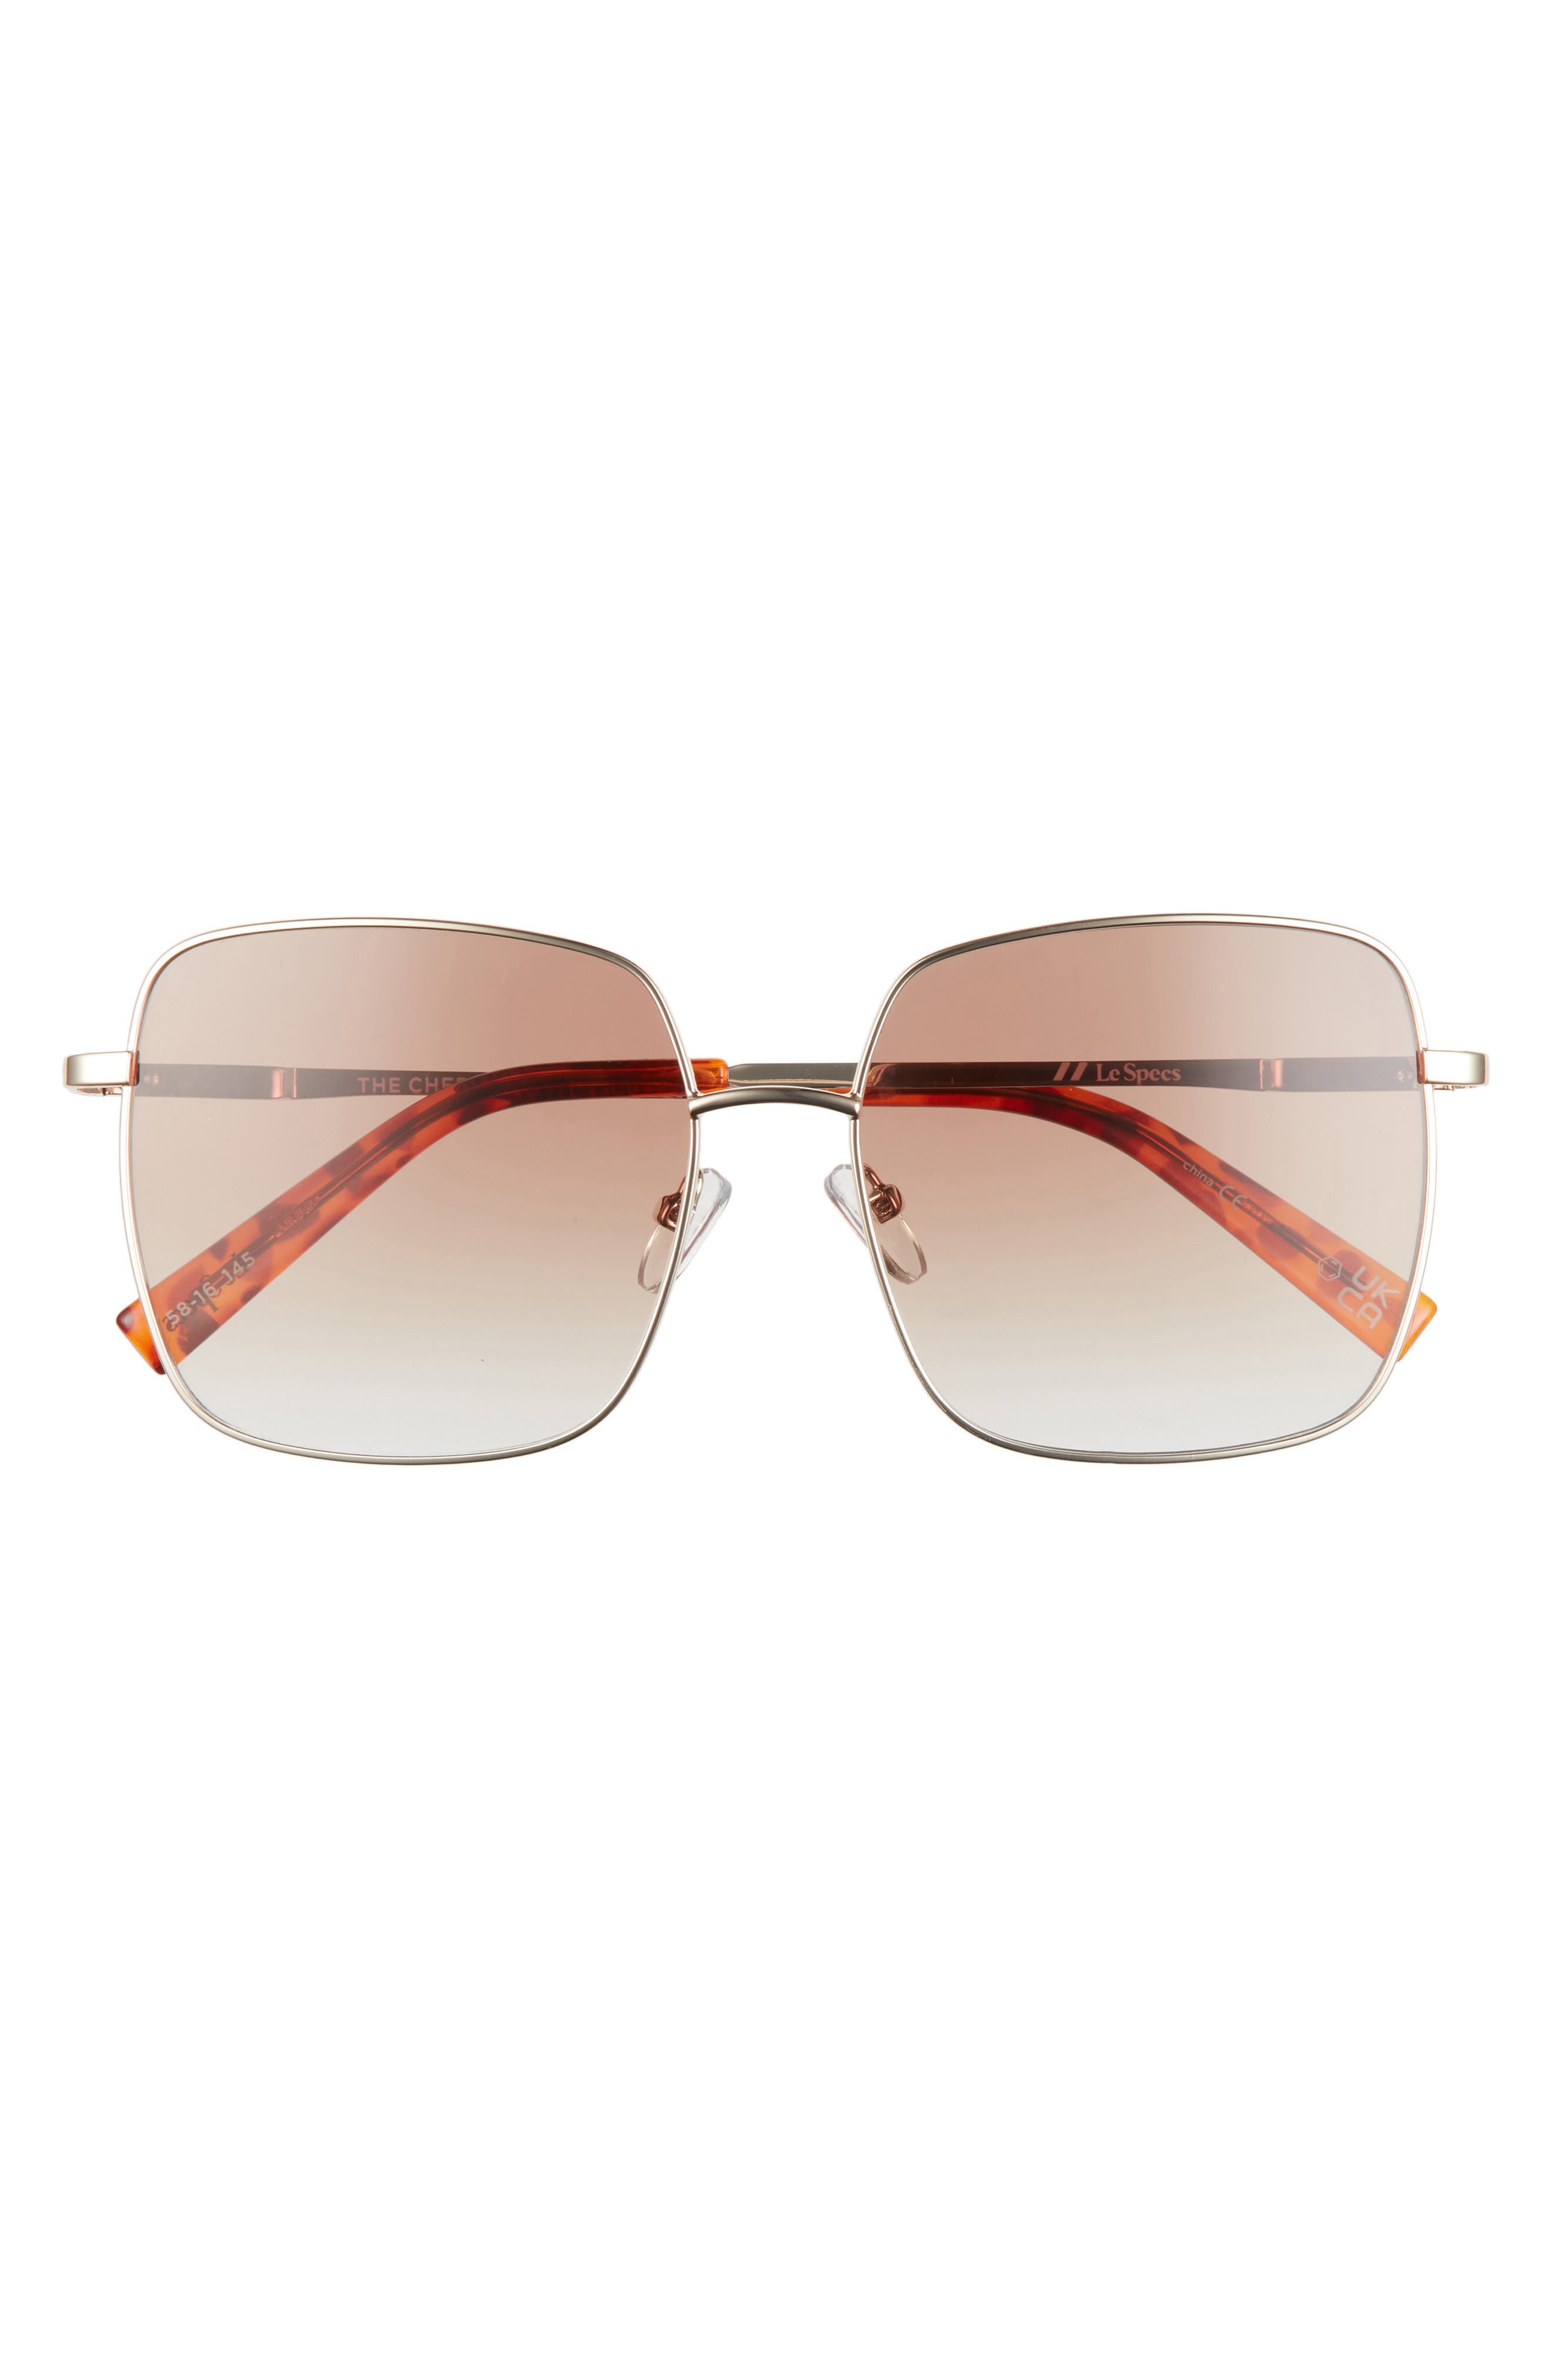 Le Specs The Cherished 58mm Square Sunglasses in Gold/Tan Grad at Nordstrom